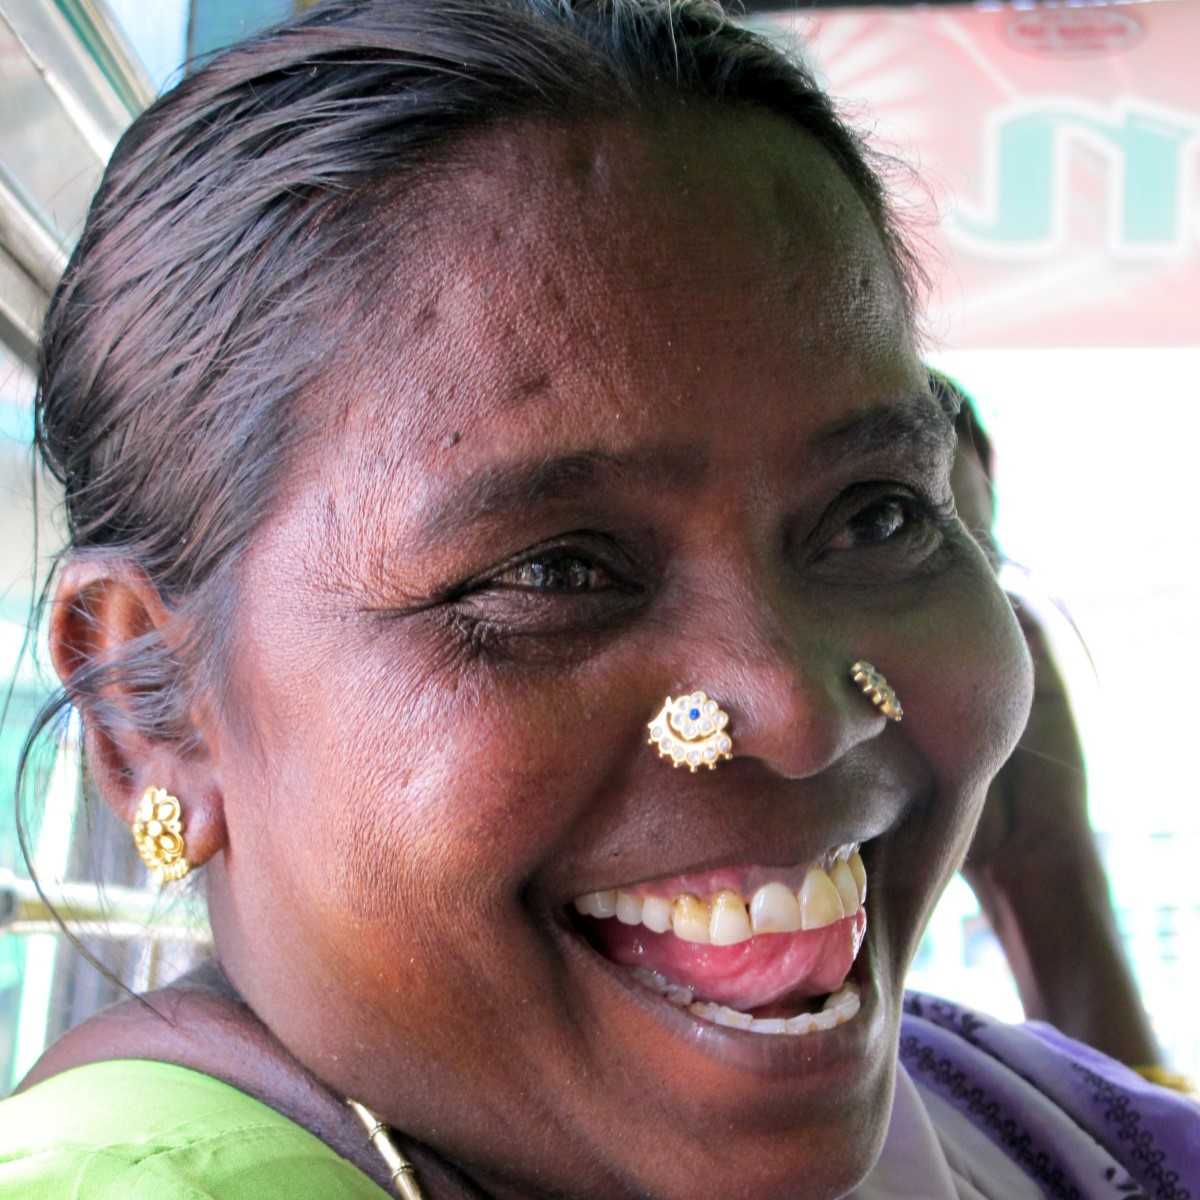 Old Tamil Woman